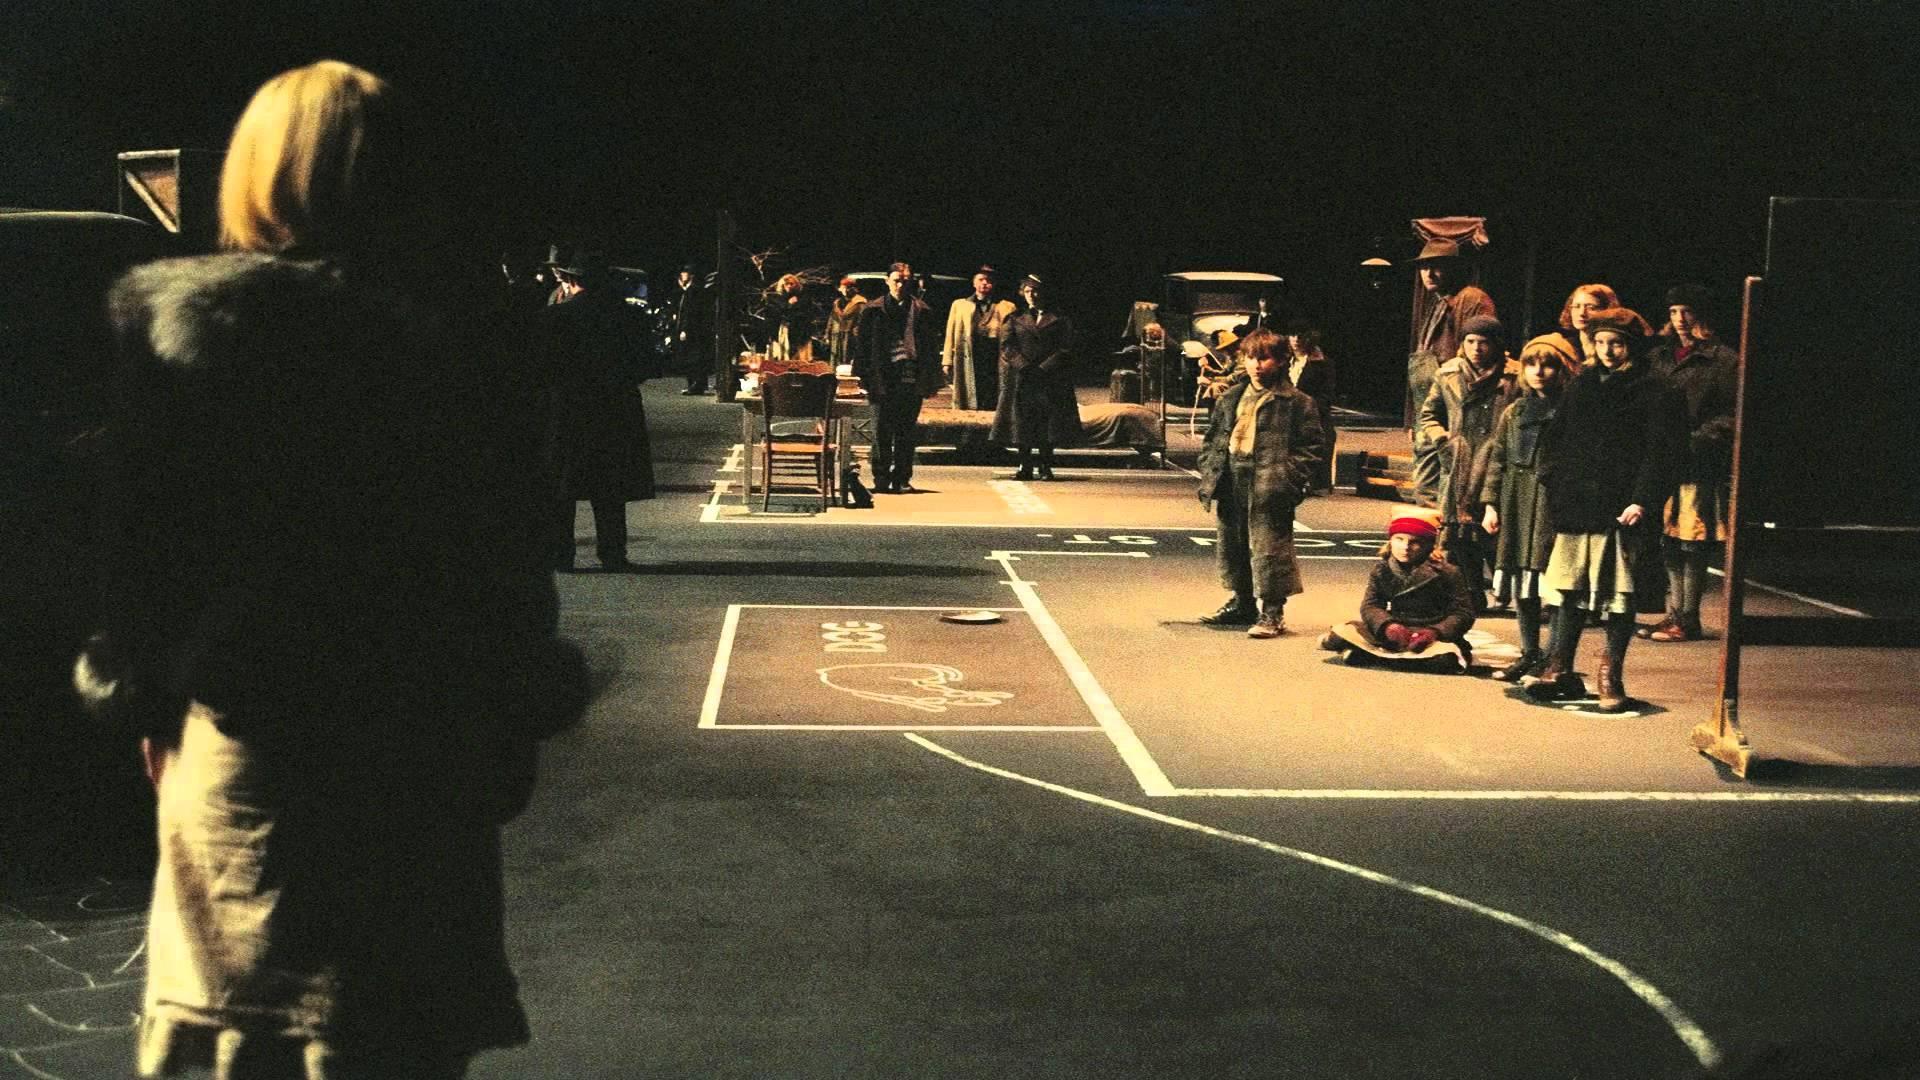 dogville